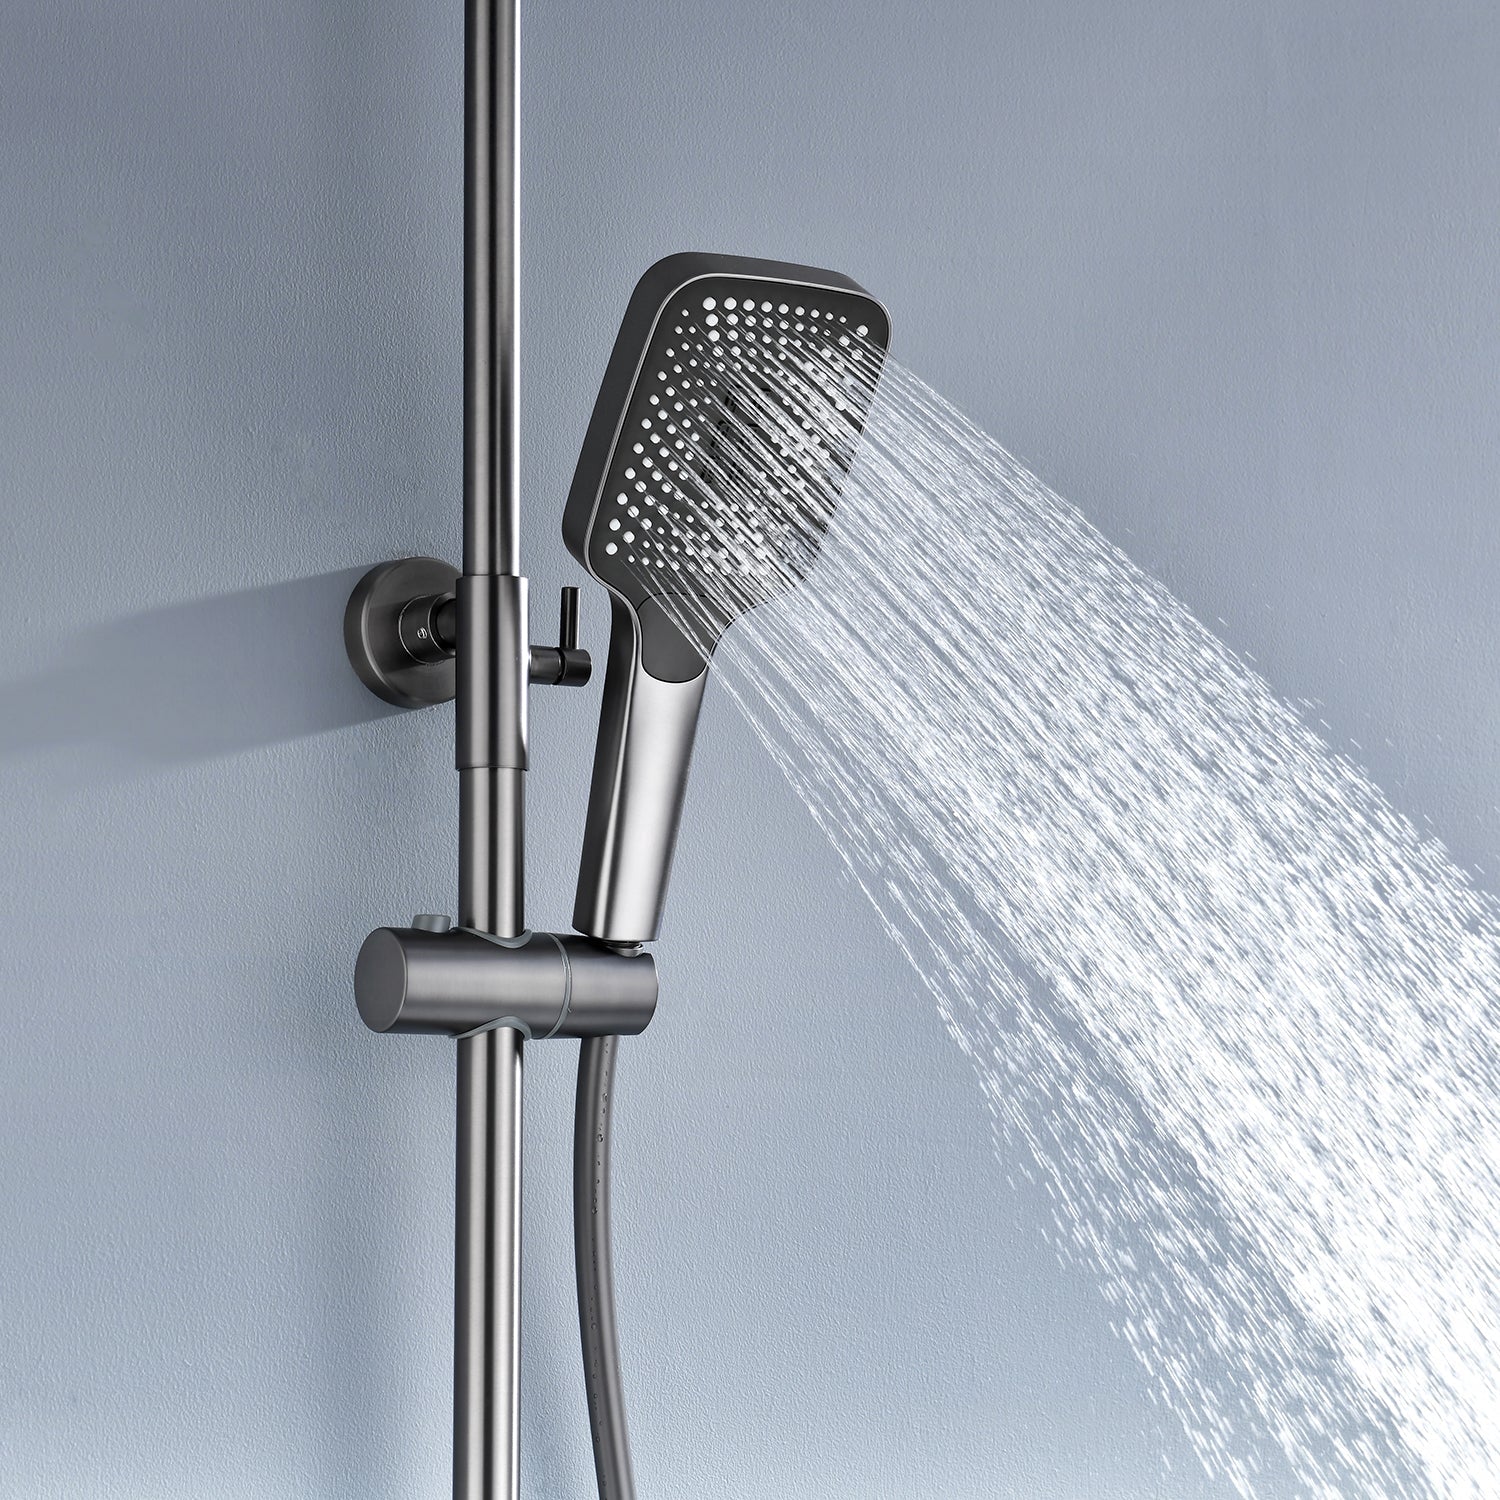 Lefton Thermostatic Shower System With Temperature Display And 4 Water Outlet Modes (Batteries-free) SST2202 -Shower Systems- Lefton Home